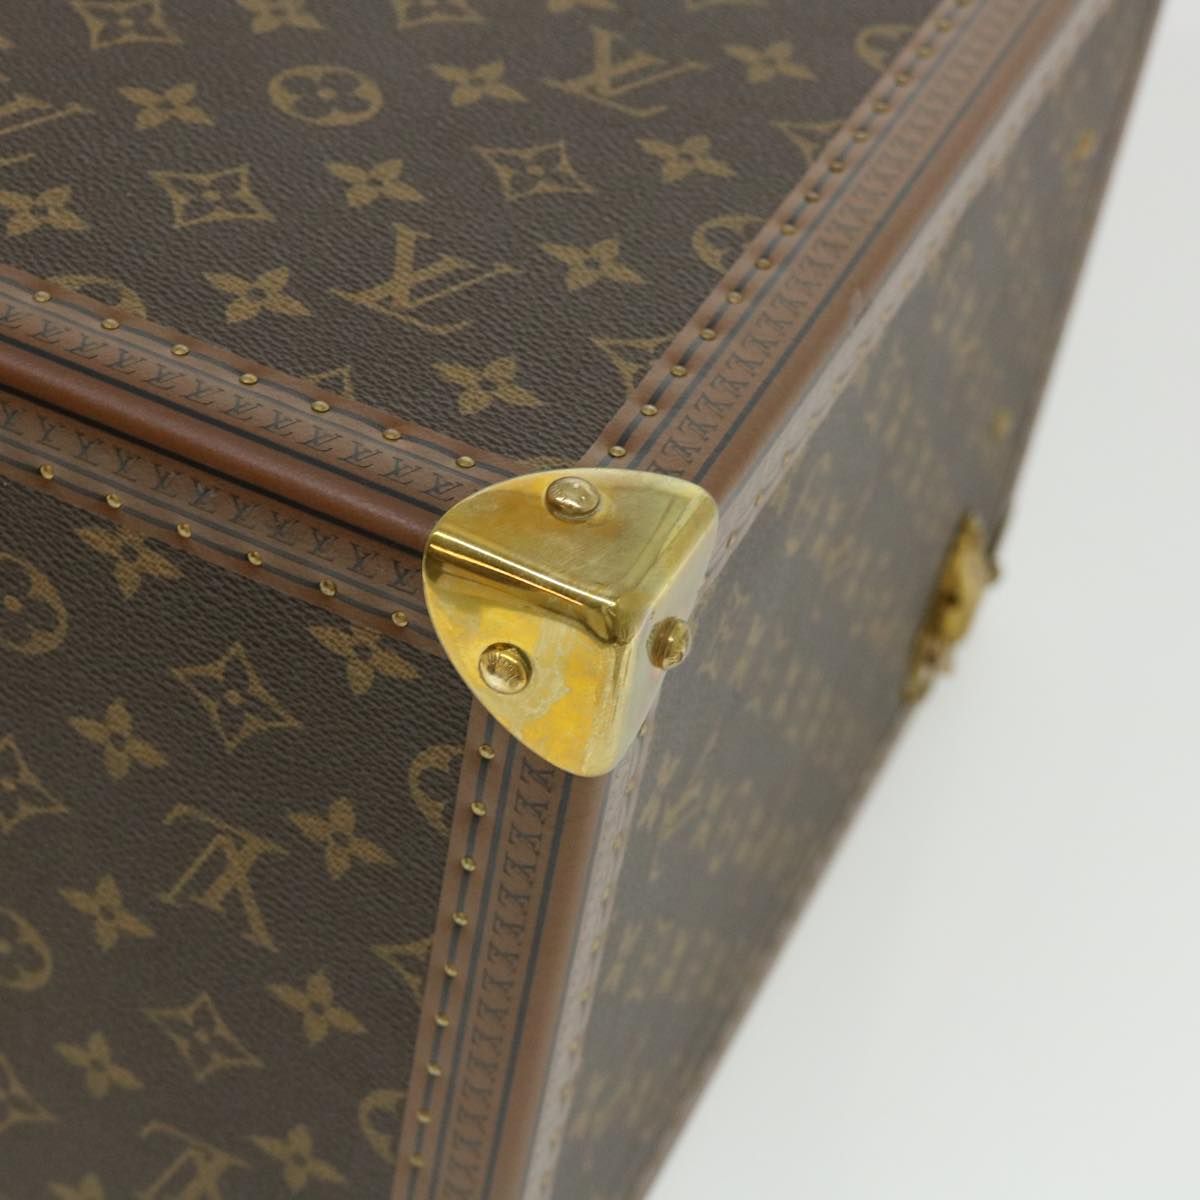 Authenticated Used Louis Vuitton Monogram Champagne Case M21825 Trunk Set